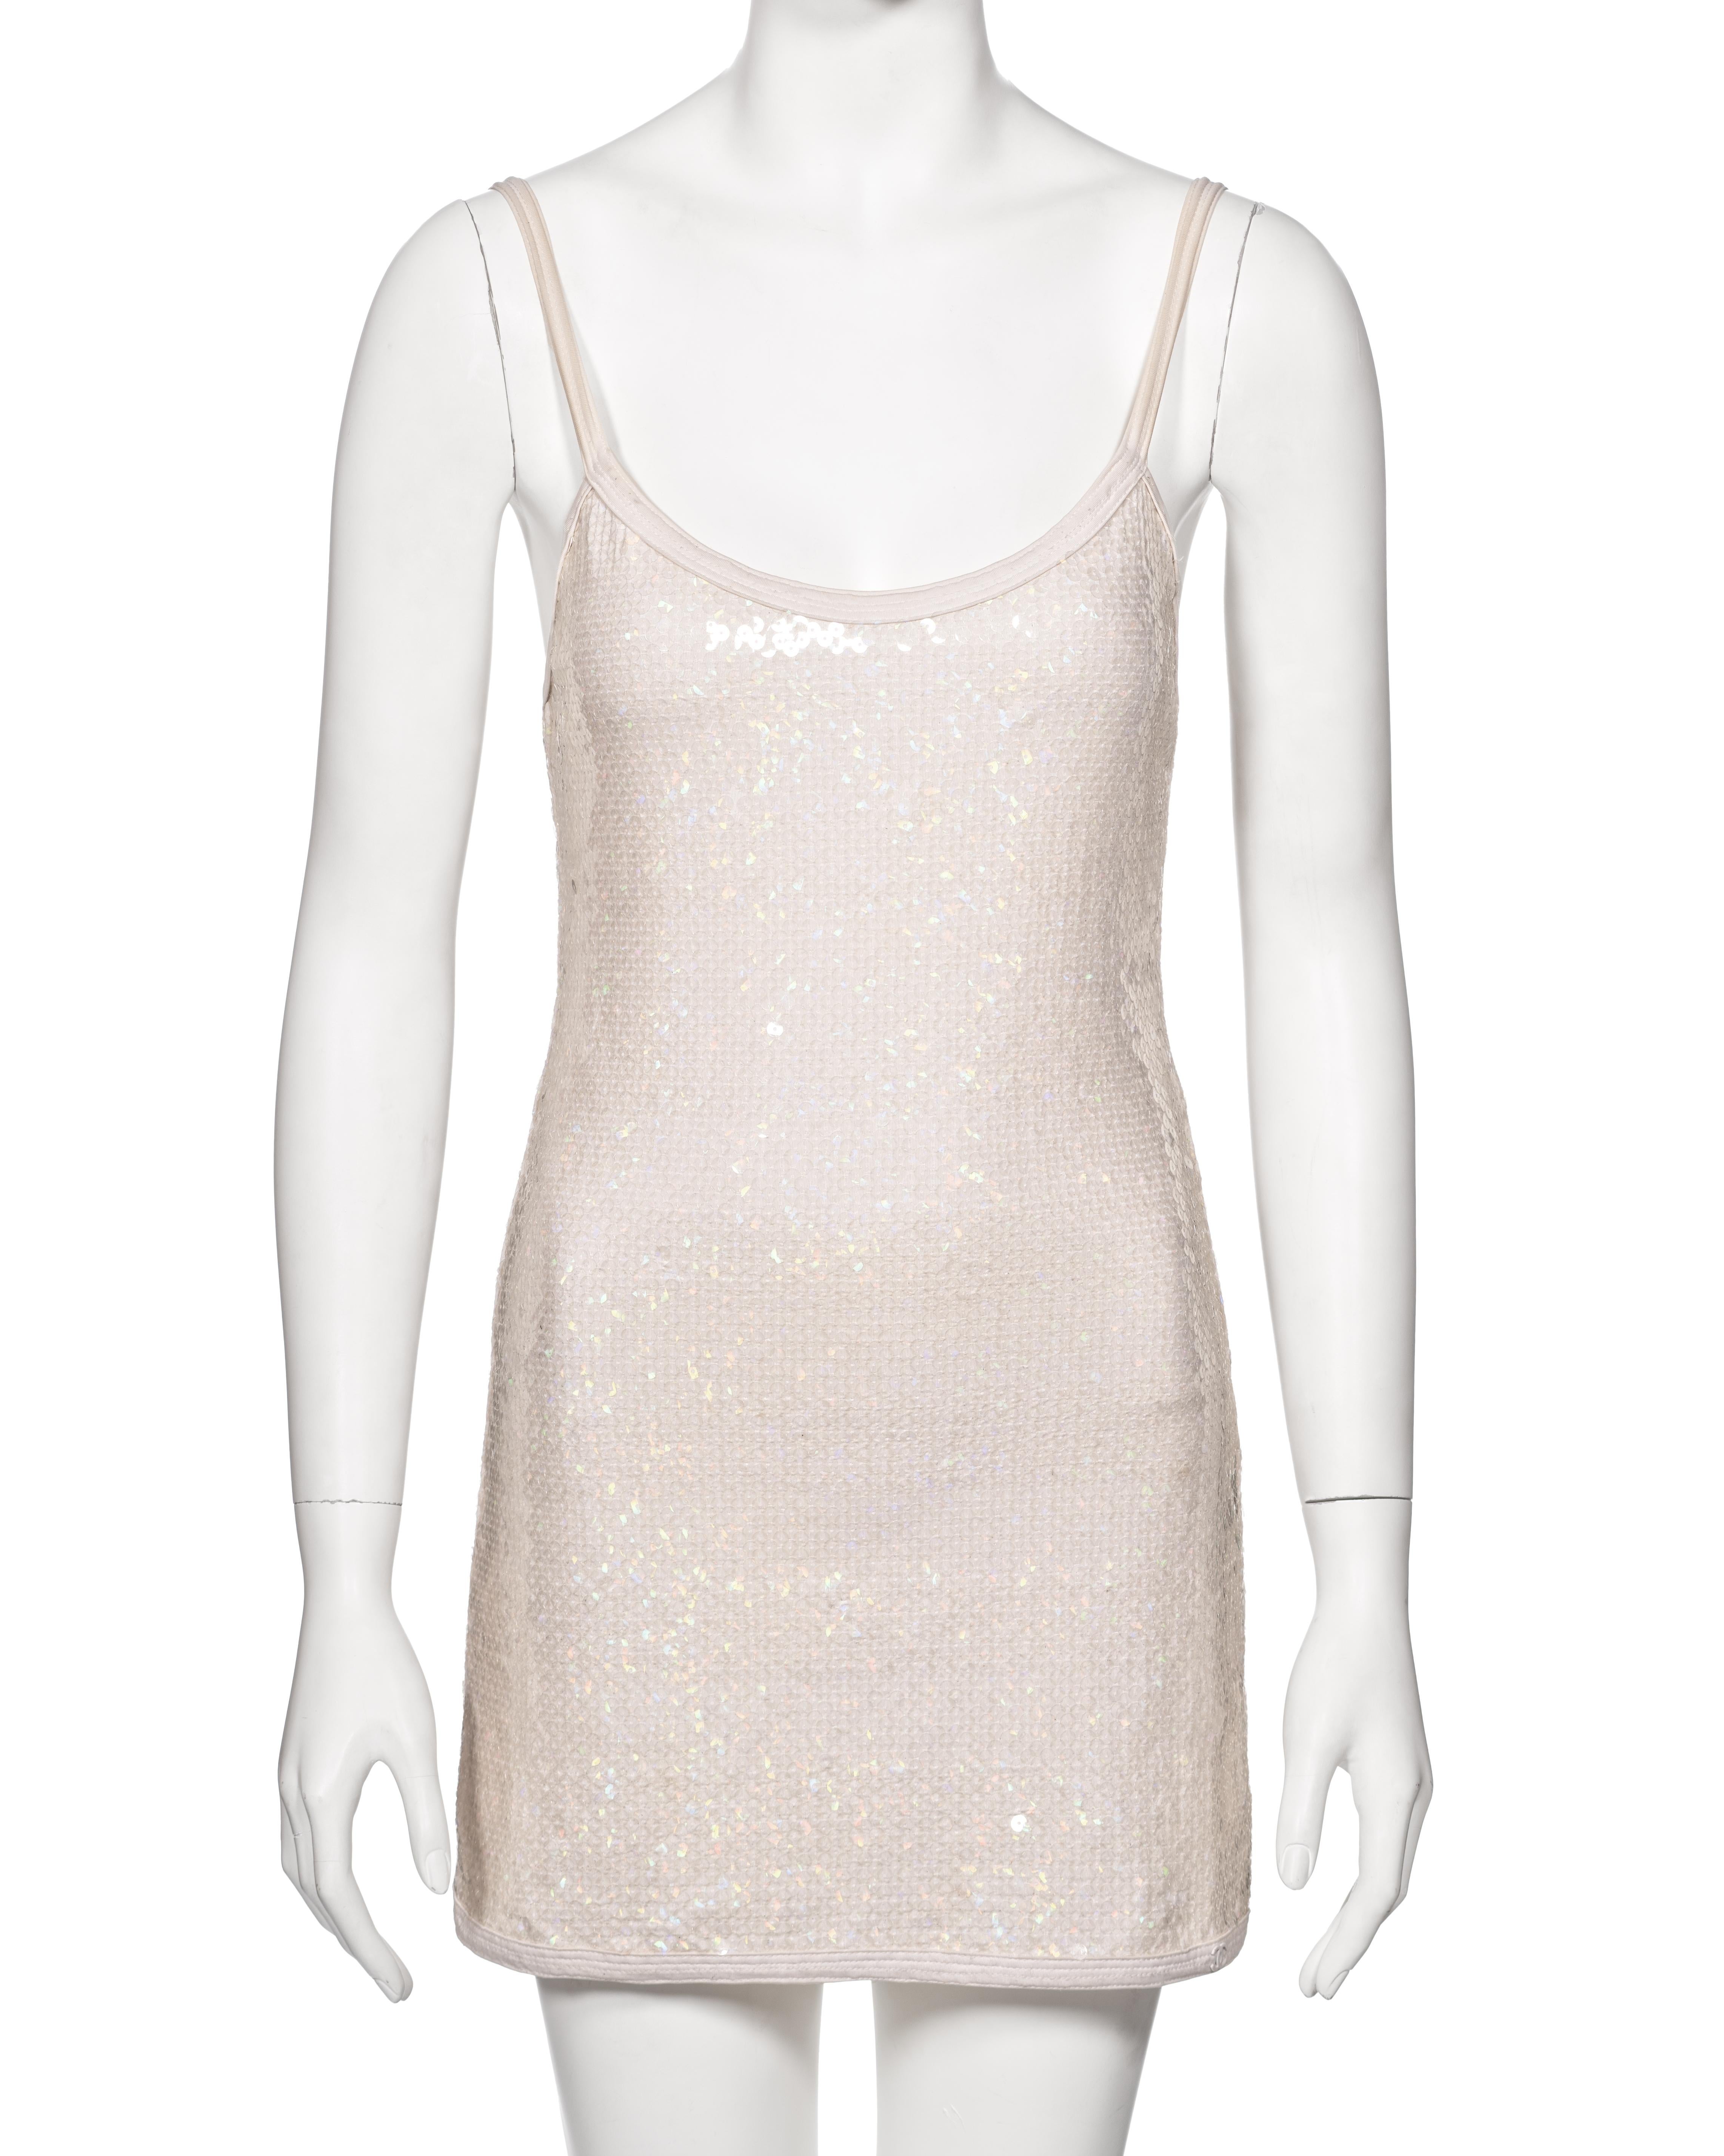 Chanel by Karl Lagerfeld White Iridescent Sequin Mini Dress, ss 2005 In Good Condition For Sale In London, GB